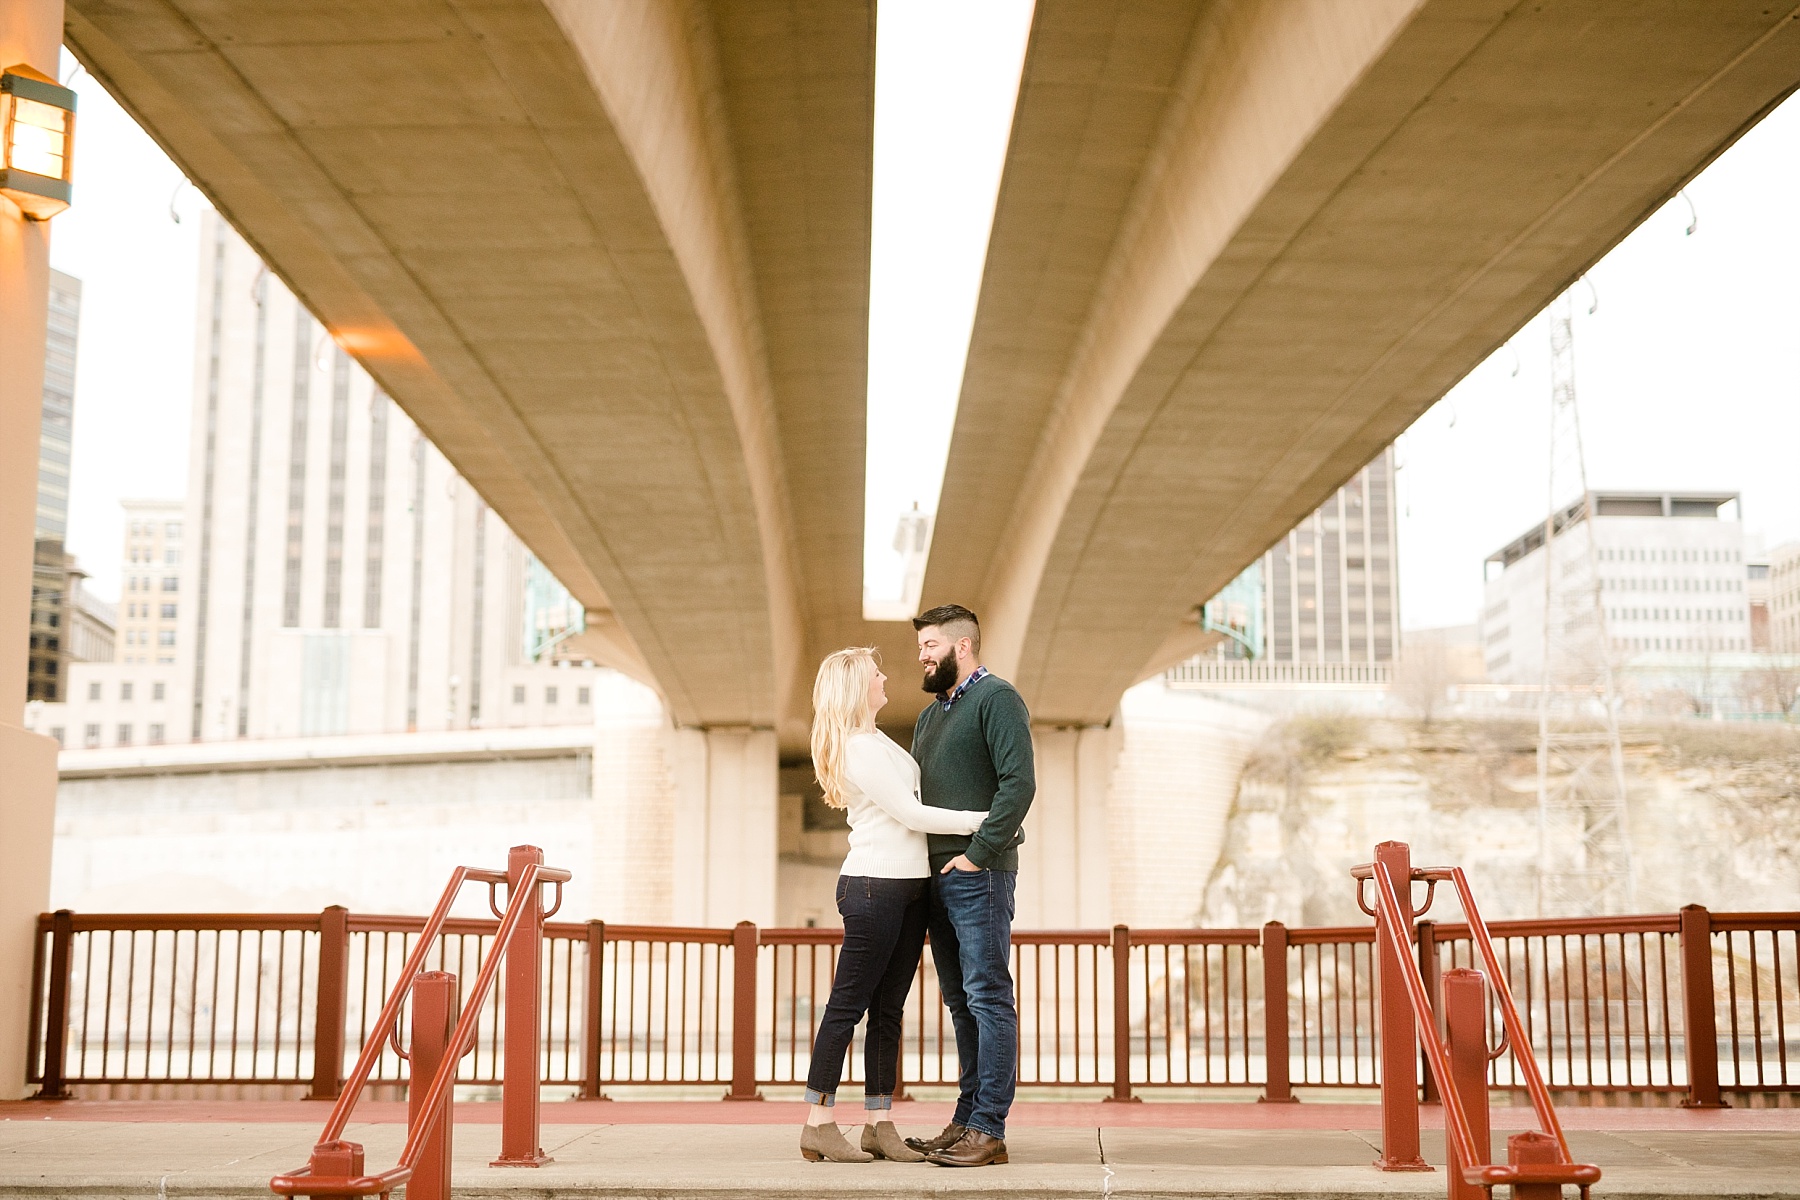 A romantic stroll through the Cathedral Hill neighborhood with these two was sweet perfection for Trina & Nolan's St. Paul Minnesota engagement pictures.